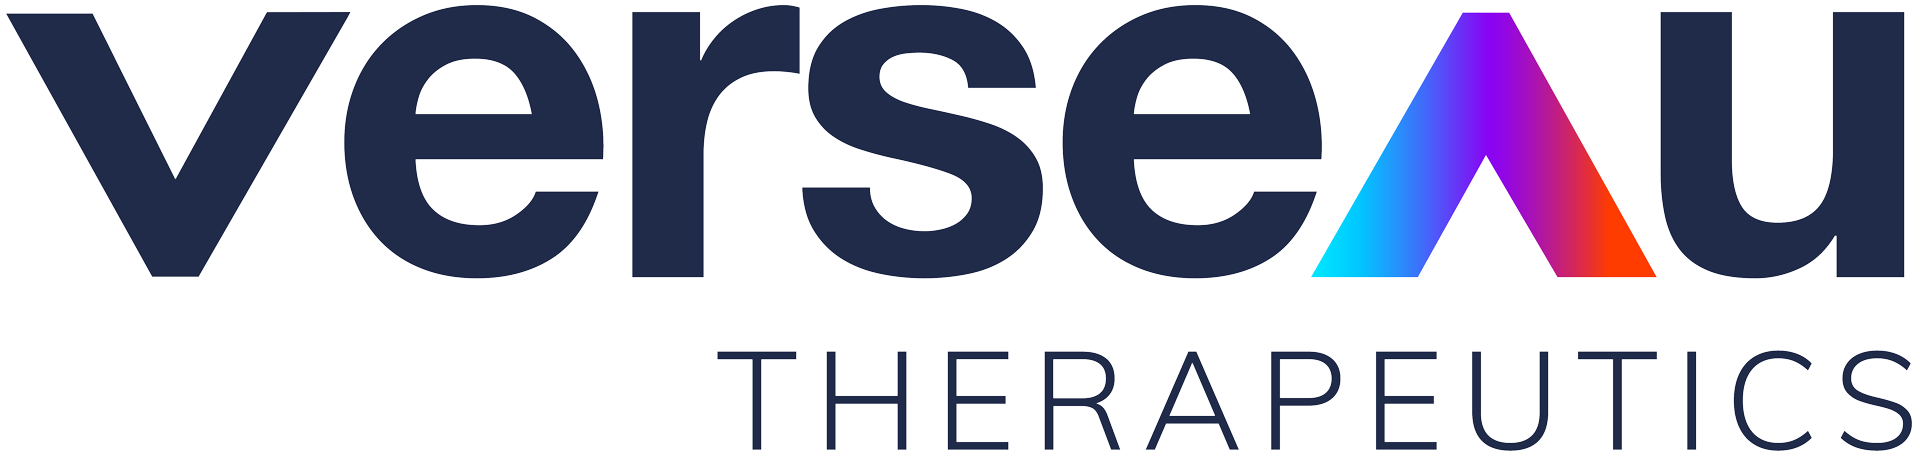 6th Macrophage-Directed Therapies Summit - Verseau Therapeutics